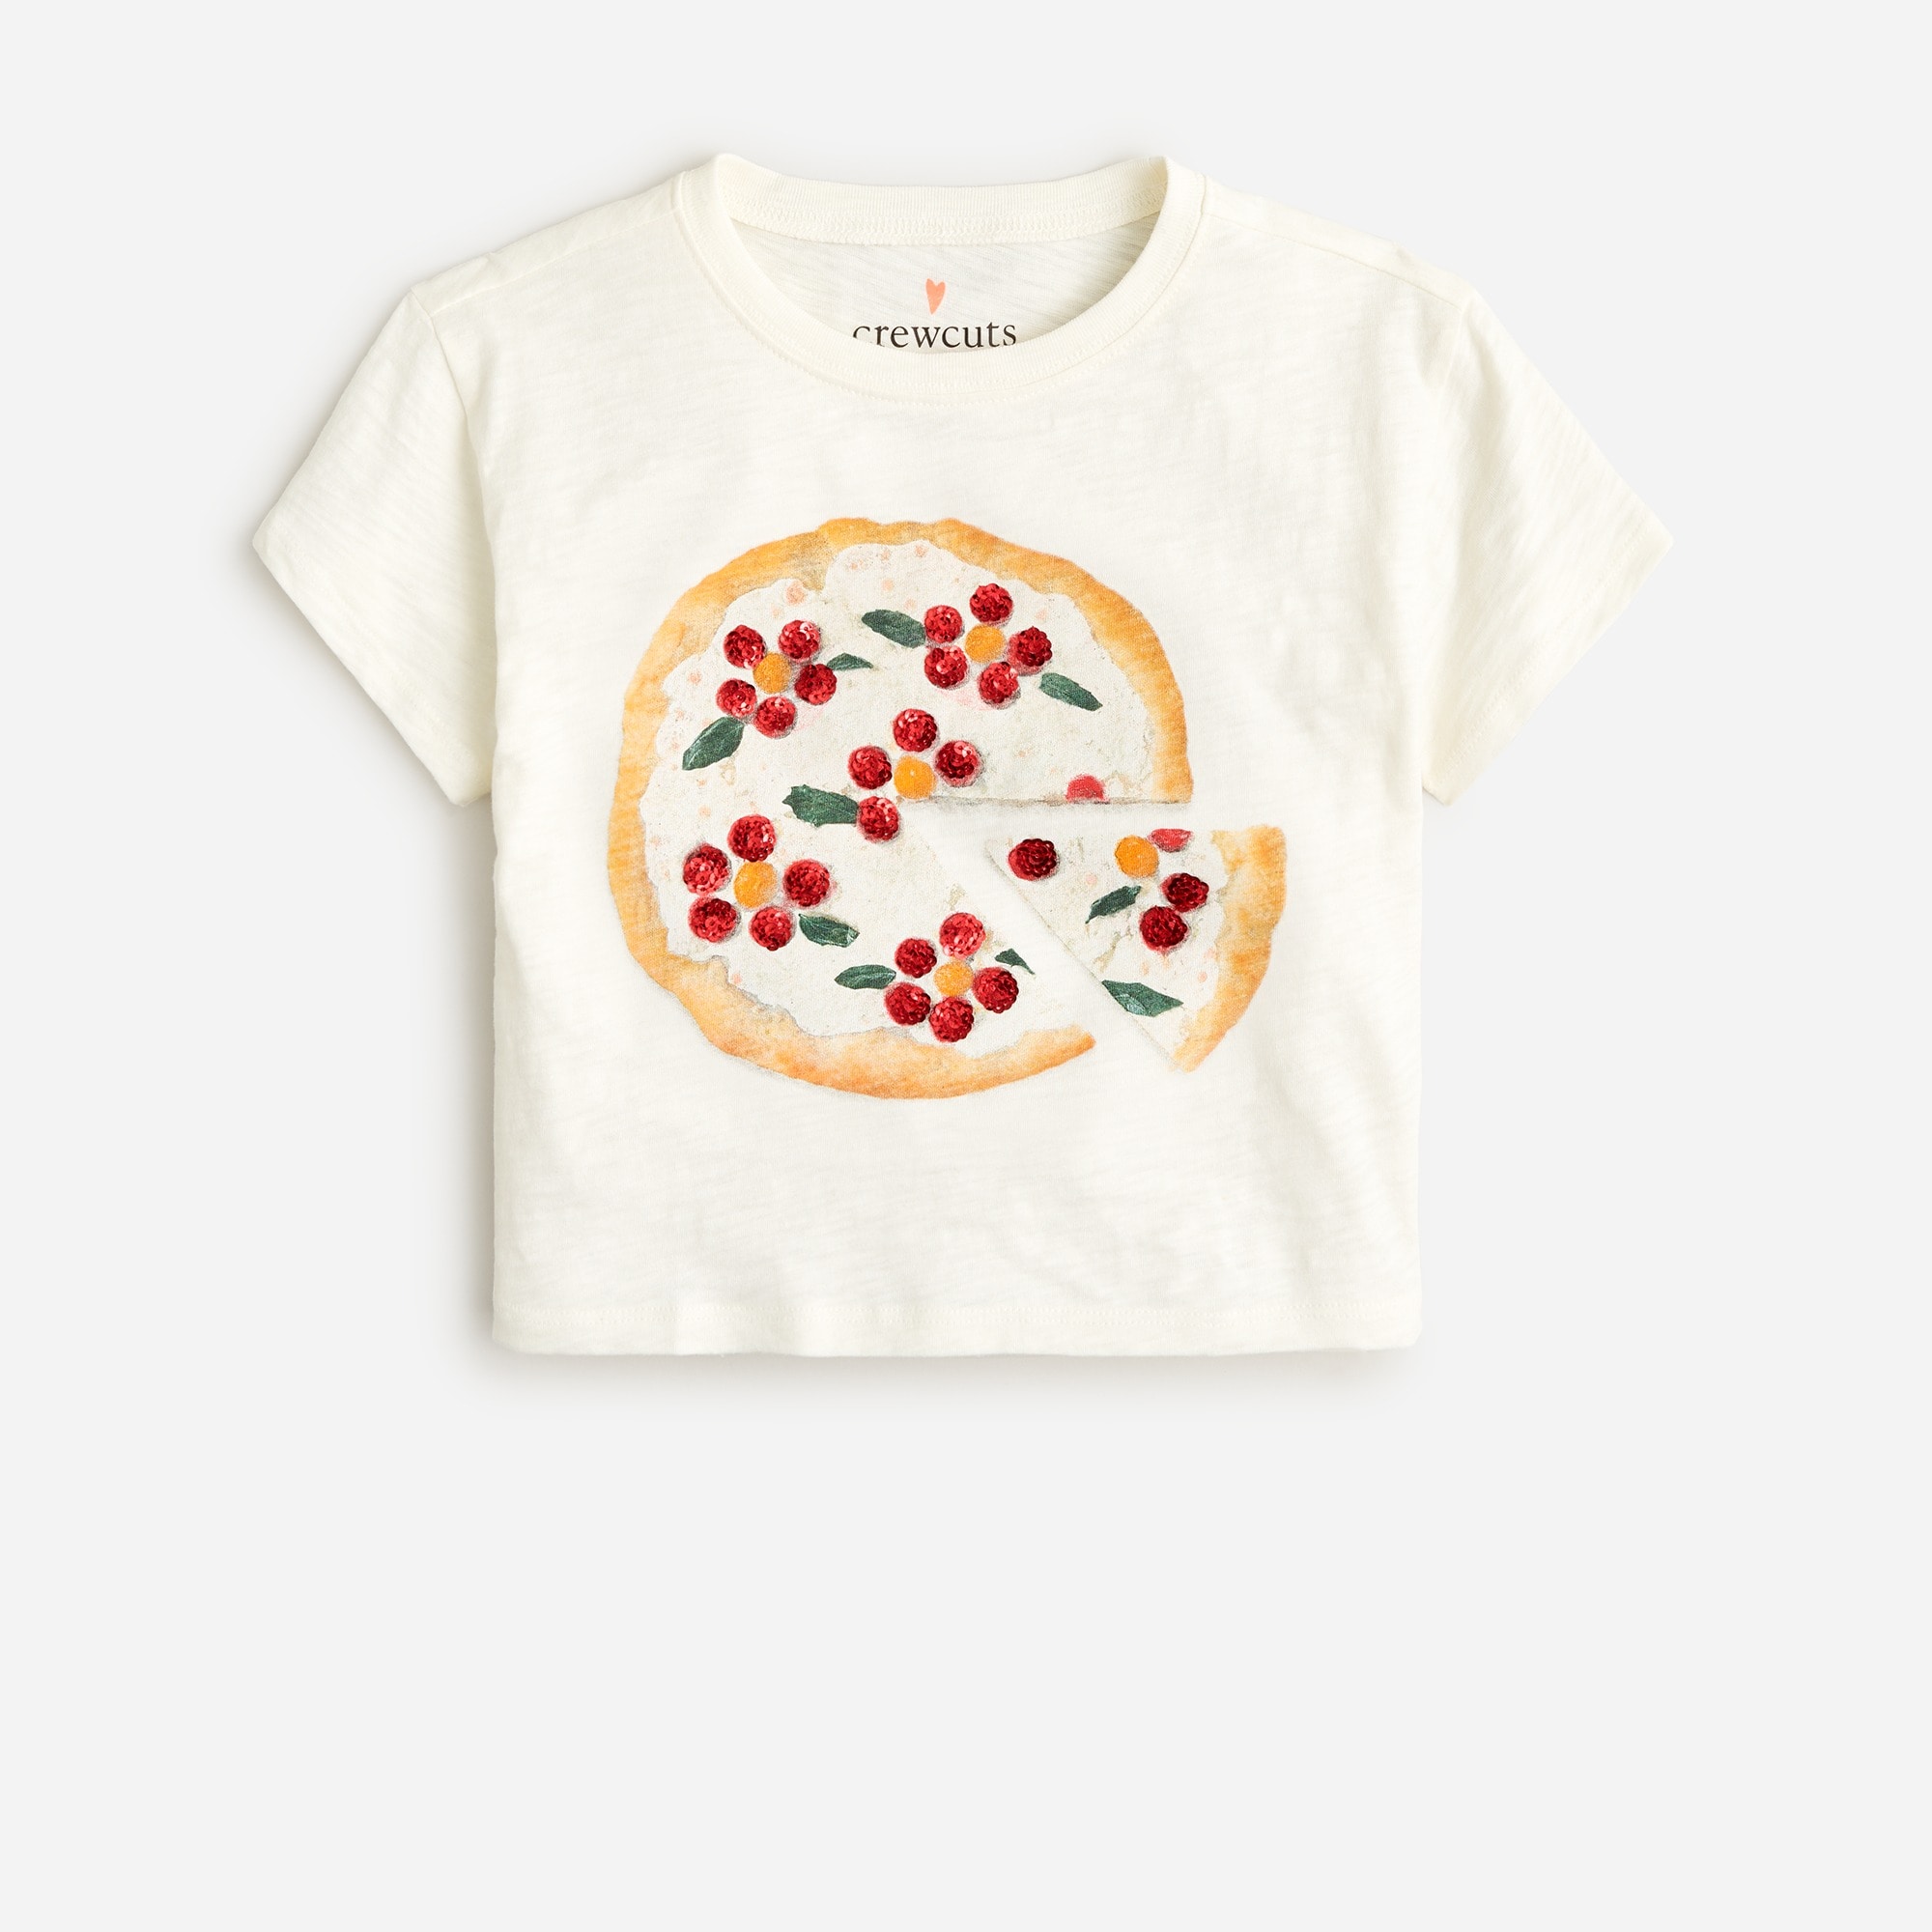  Girls' cropped pizza graphic T-shirt with sequins